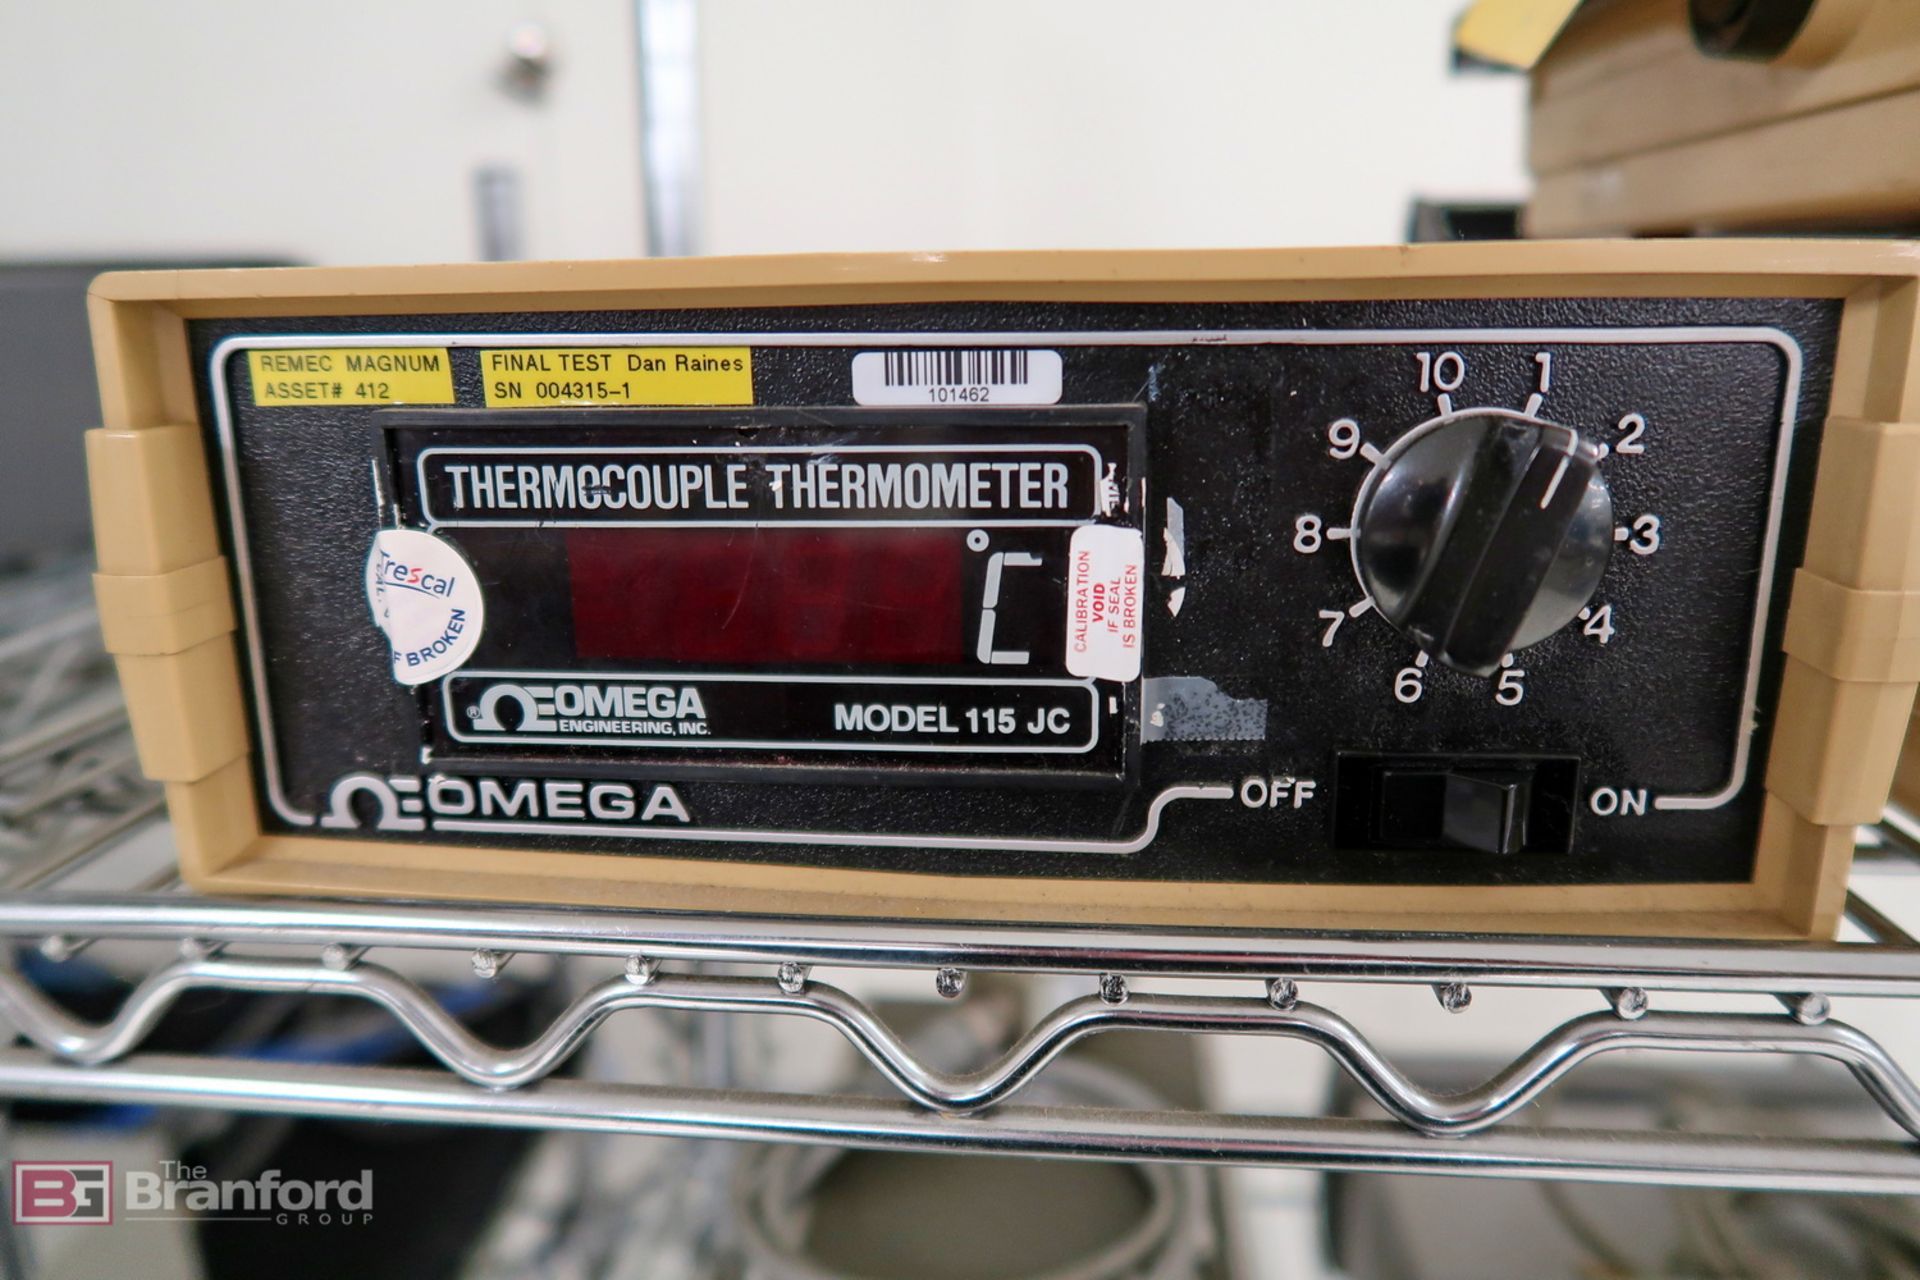 Omega 115JC thermocouple thermometer